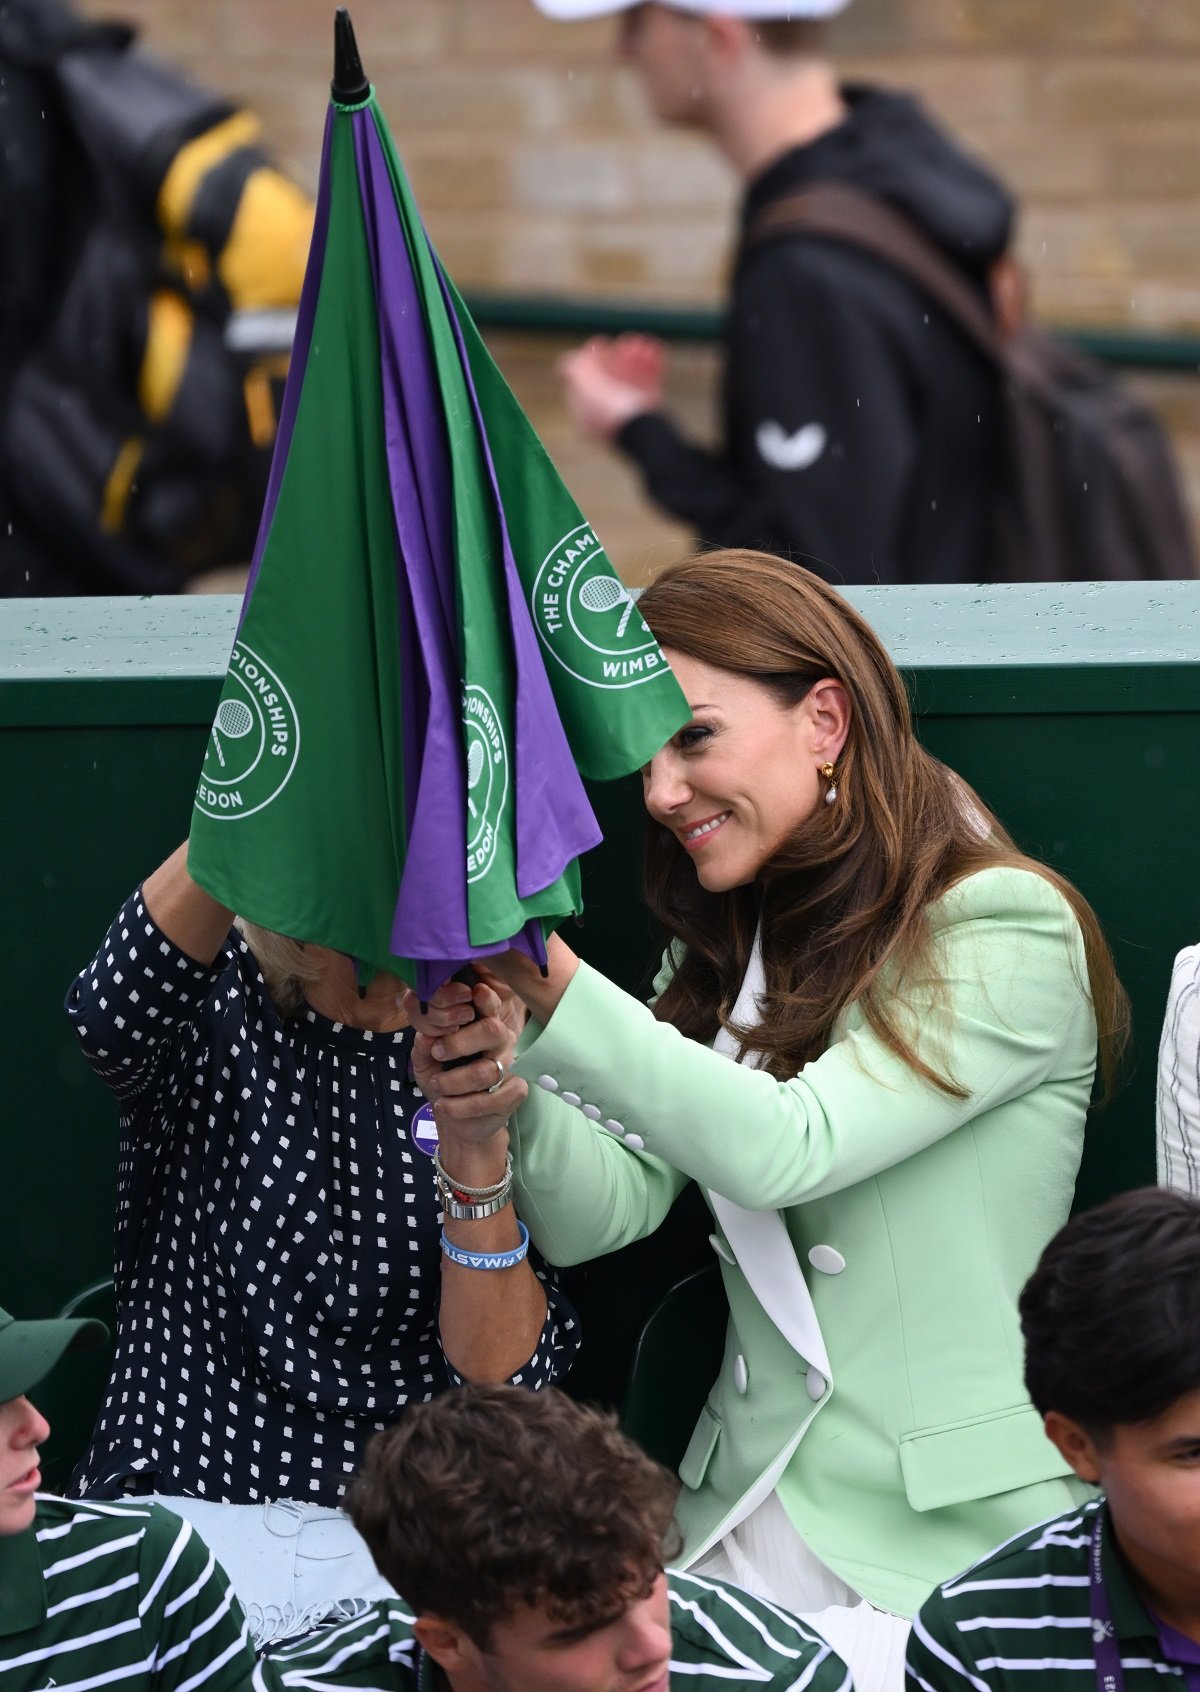 Body Language Expert Observes How Kate Middleton Acted the Moment It ...